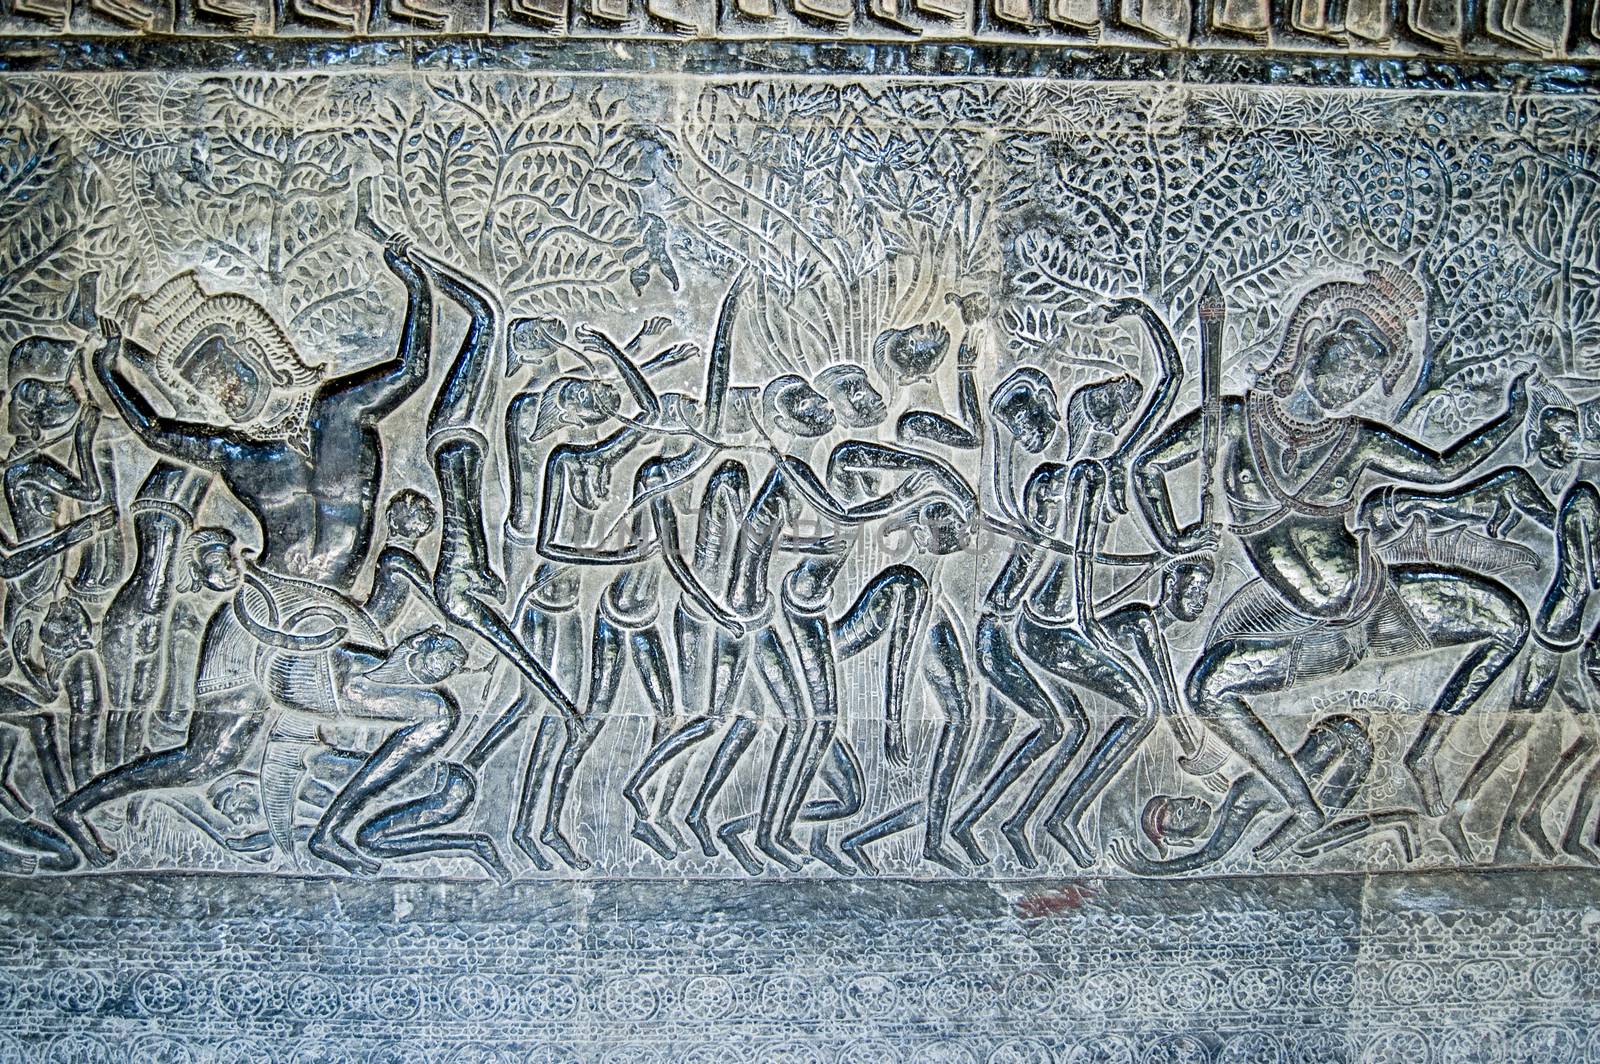 Bas relief carving showing one of the 32 hells in the Hindu religion. South gallery, Eastern section at Angkor Wat Temple, Siem Reap, Cambodia.